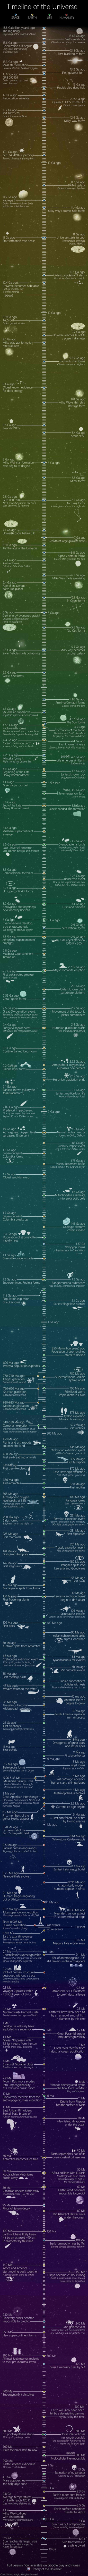 Timeline of our Universe